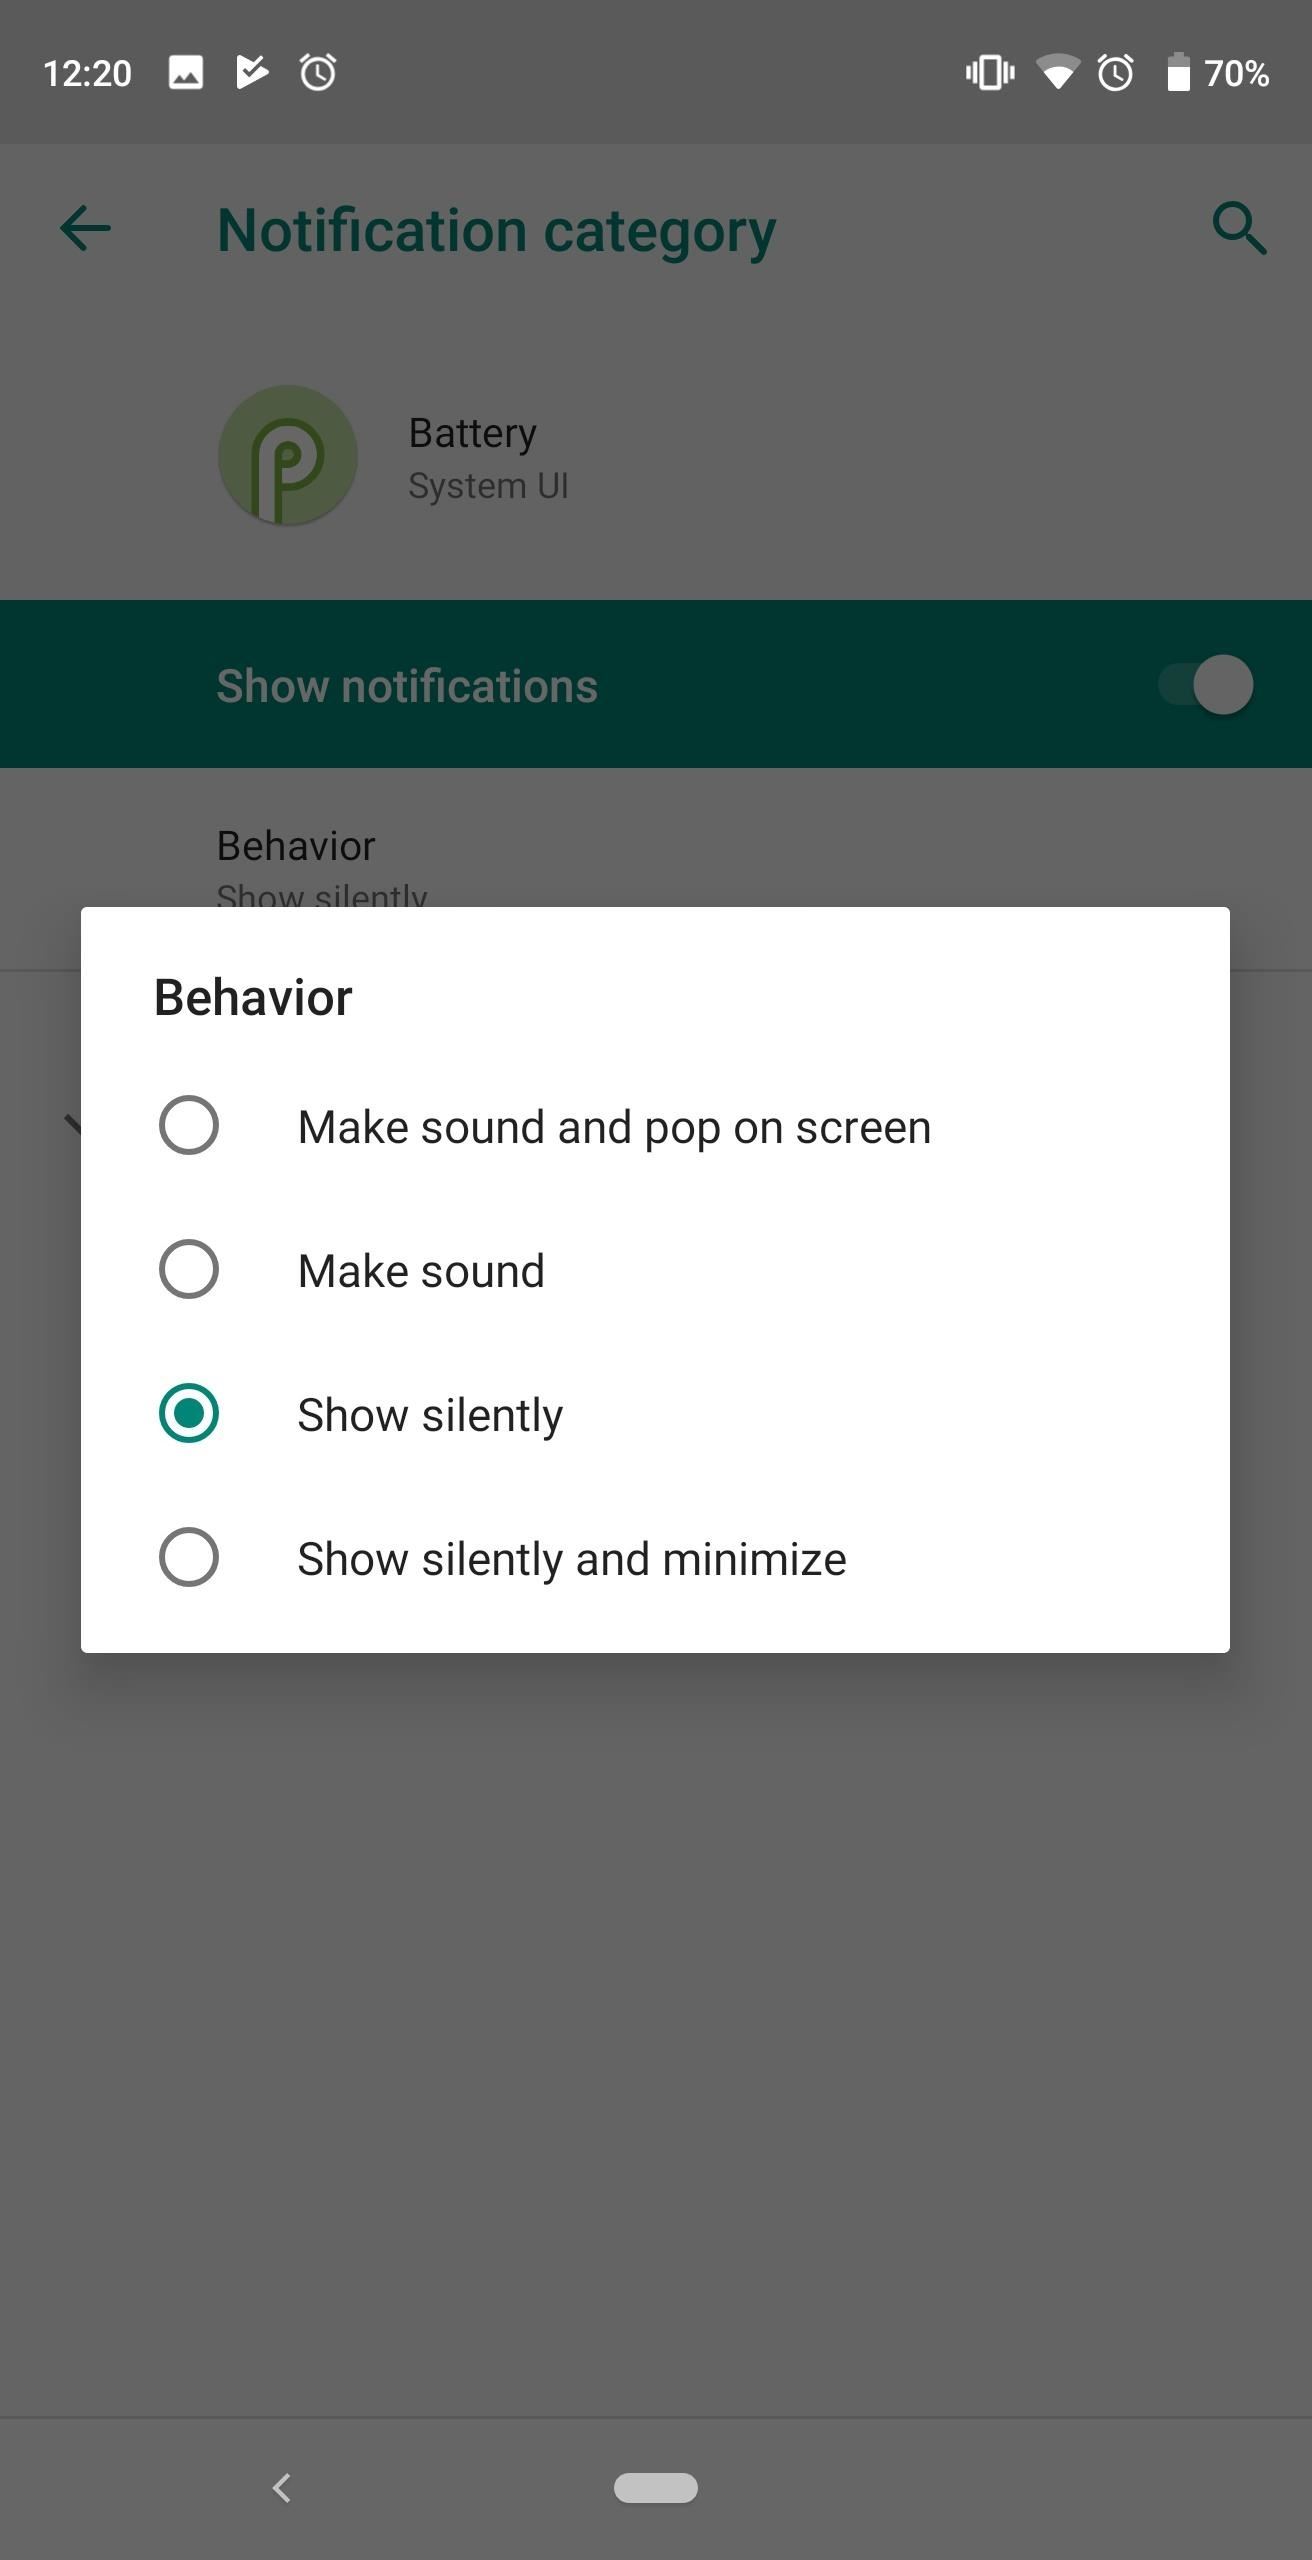 How To Disable Apps The Use Of Battery Notification On Android